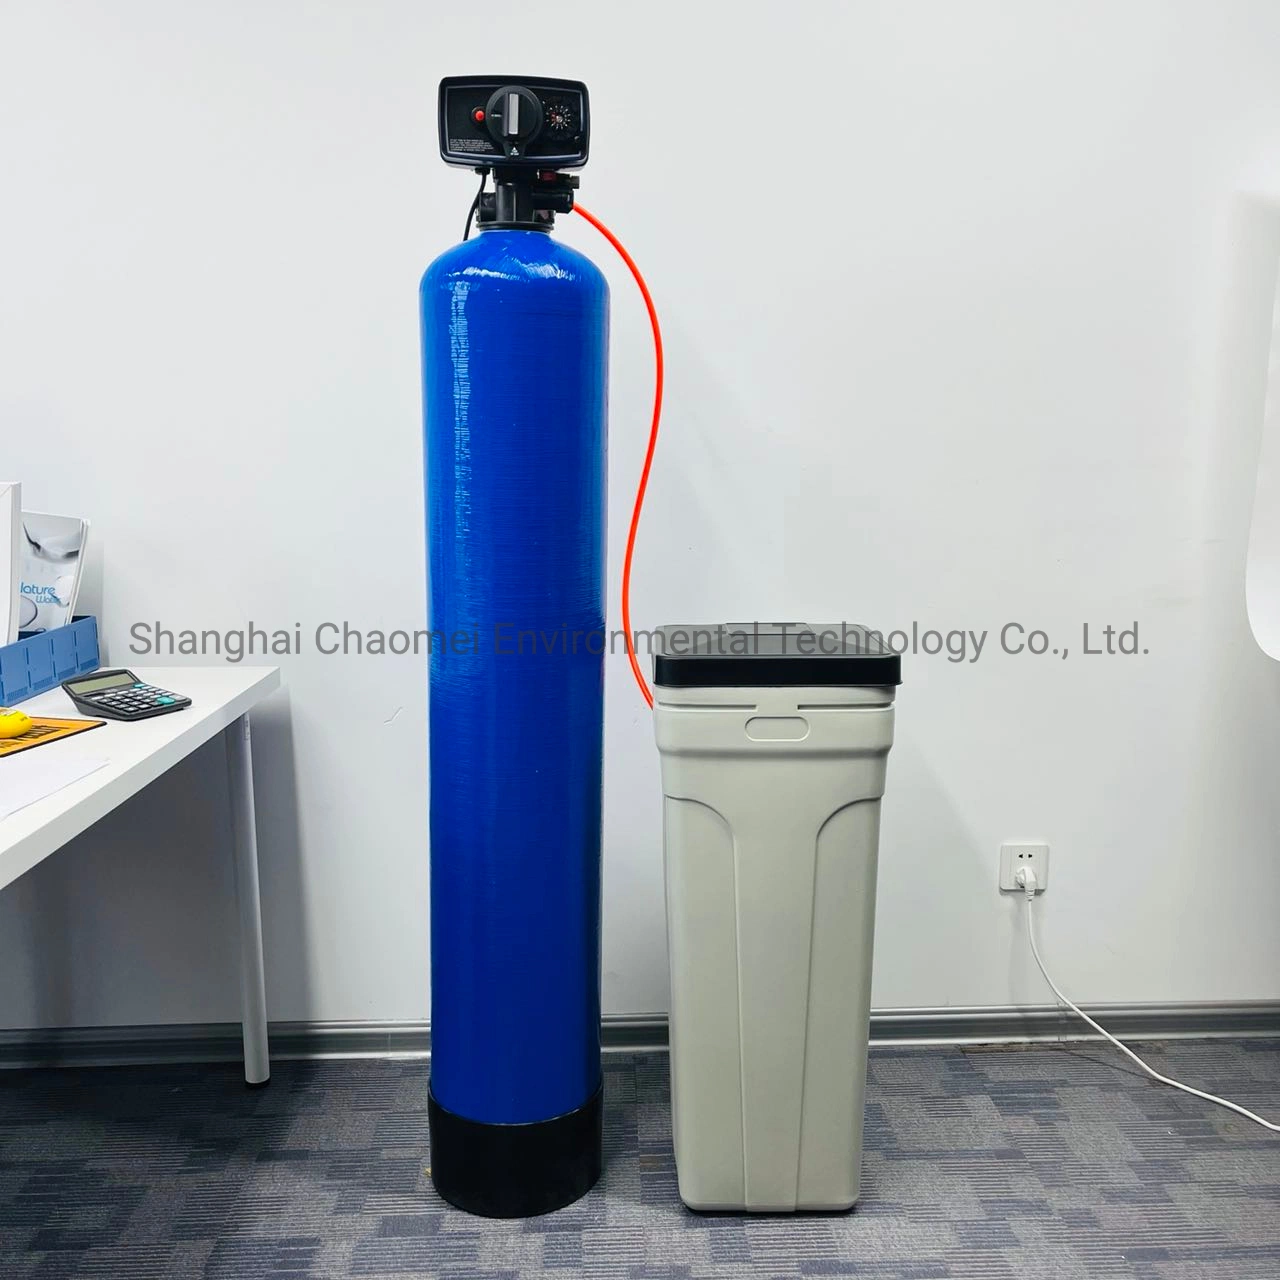 Ion Exchange Principle 30m3/Hr Water Softener System for Industrial Heating Exchange System